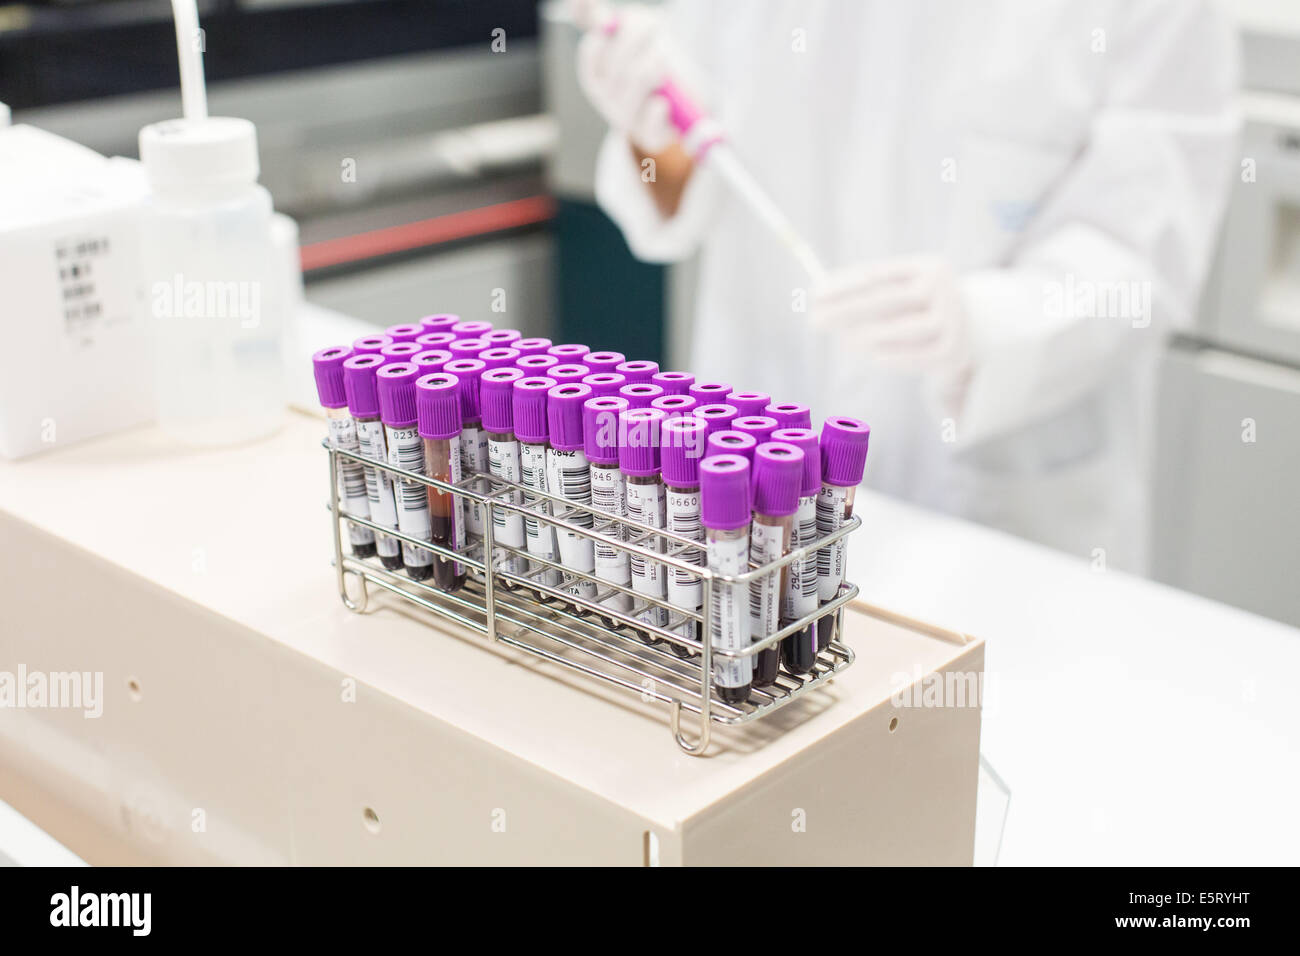 Blood samples in a medical laboratory. Stock Photo